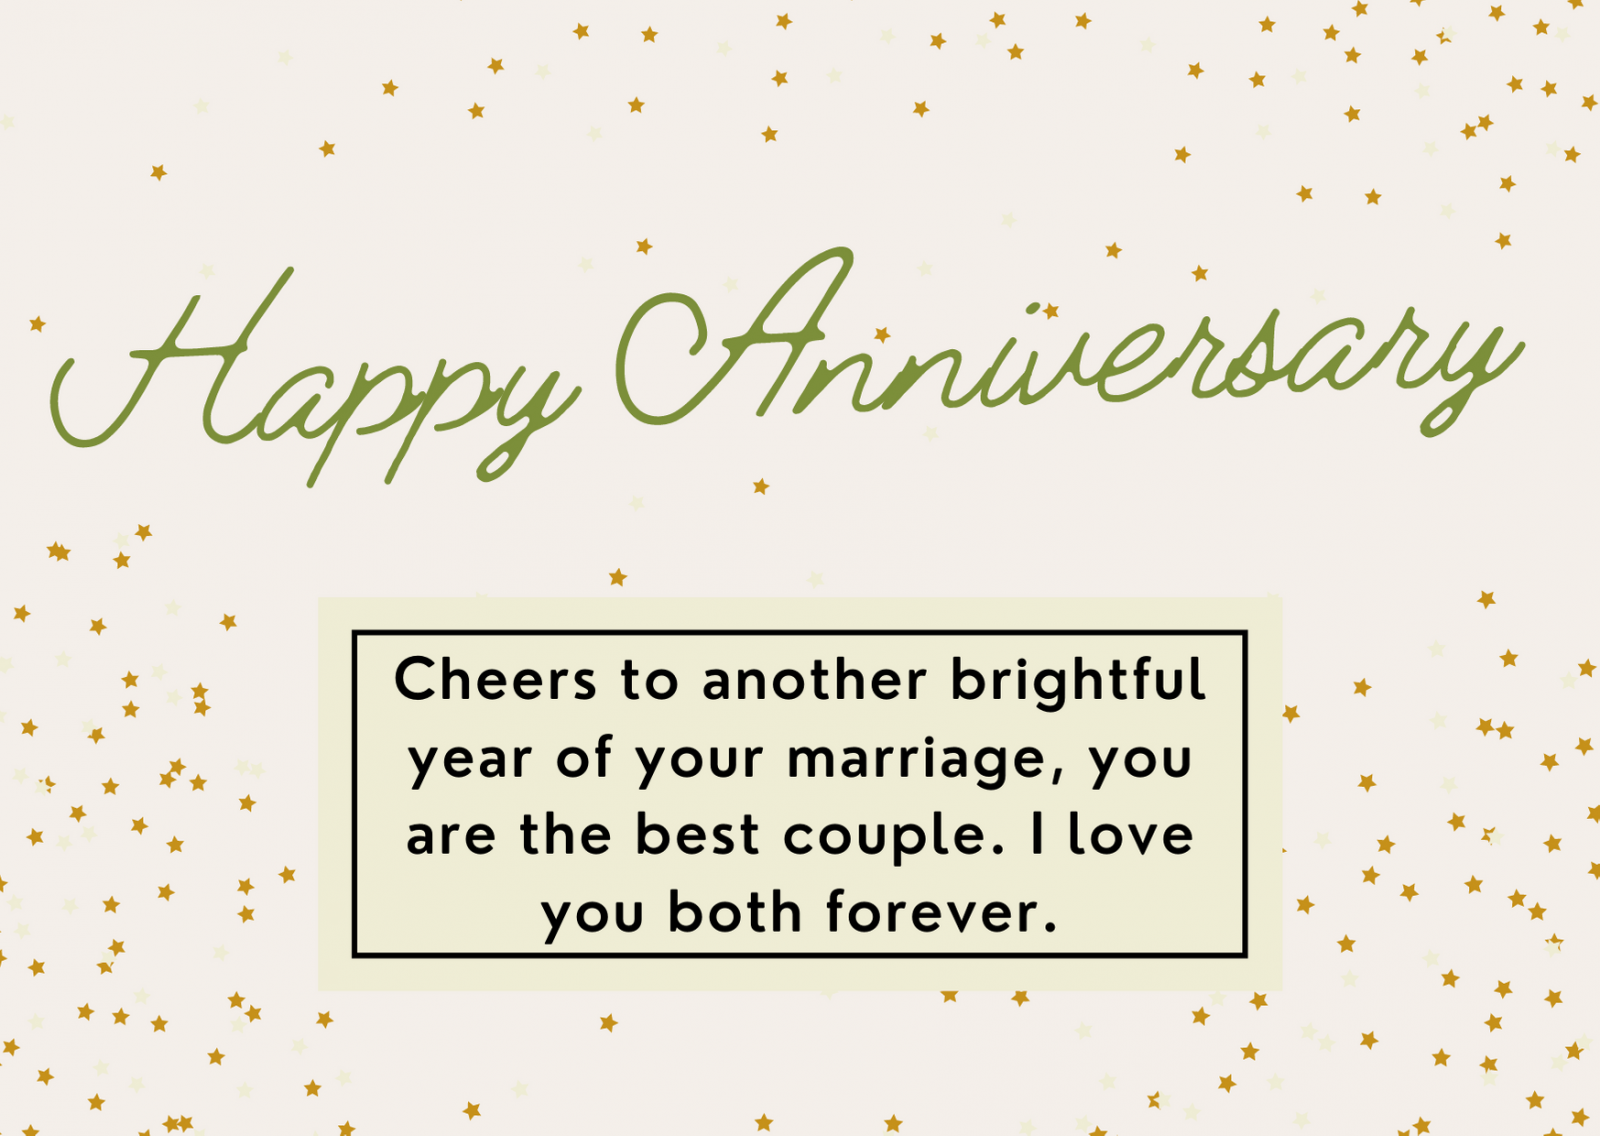 wedding anniversary quotes for parents